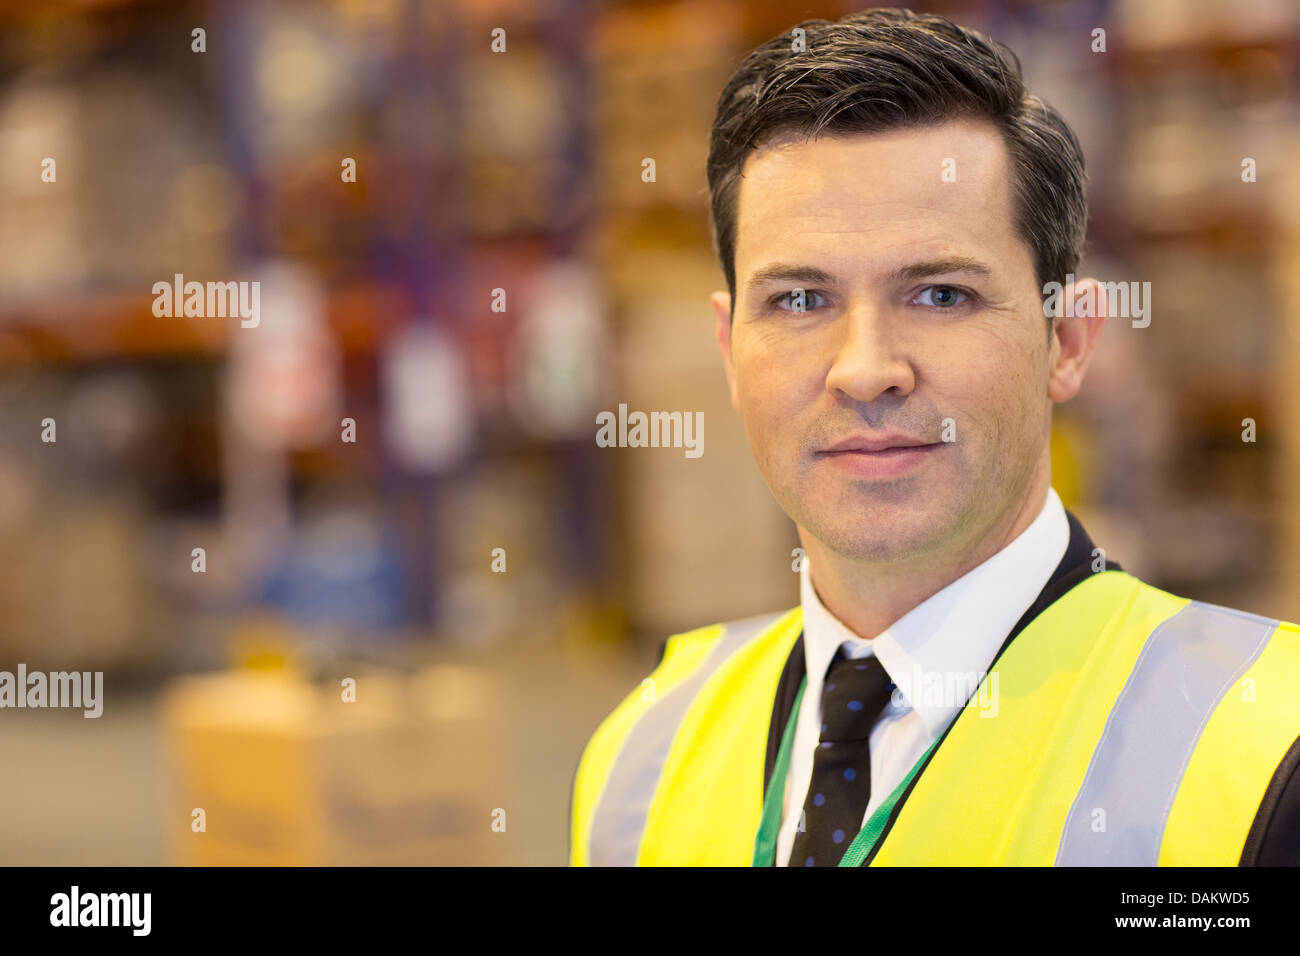 Businessman standing in warehouse Stock Photo